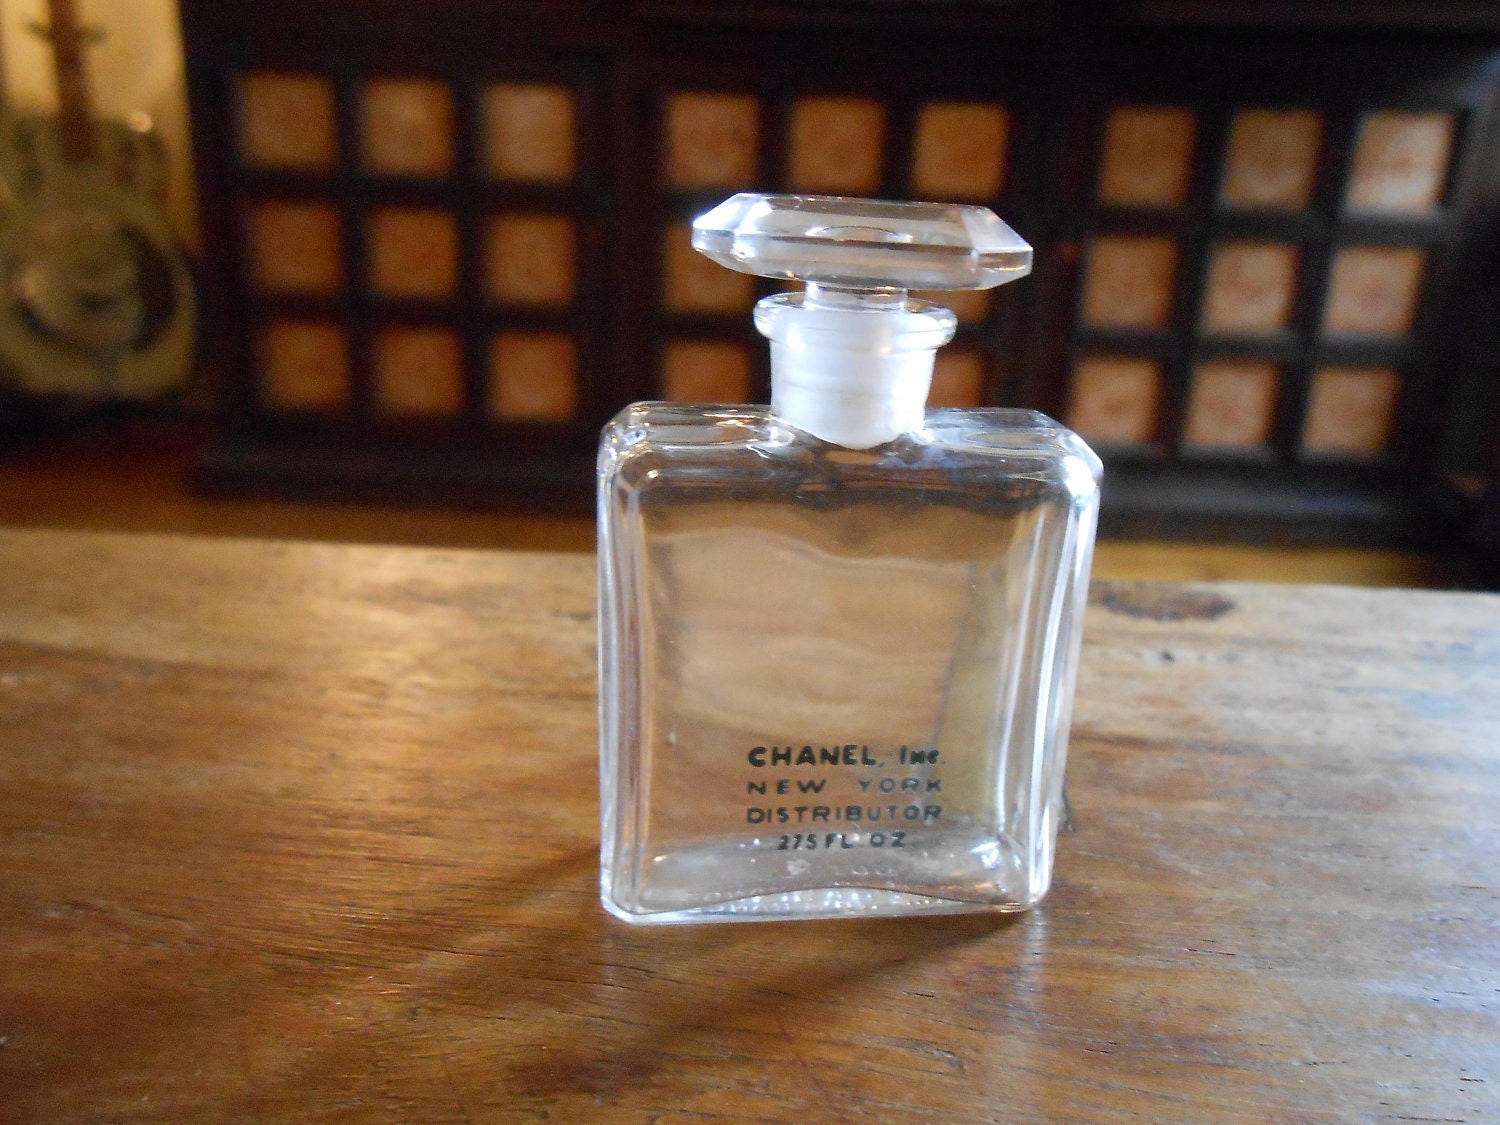 chanel perfume bottle on Etsy, a global handmade and vintage marketplace.